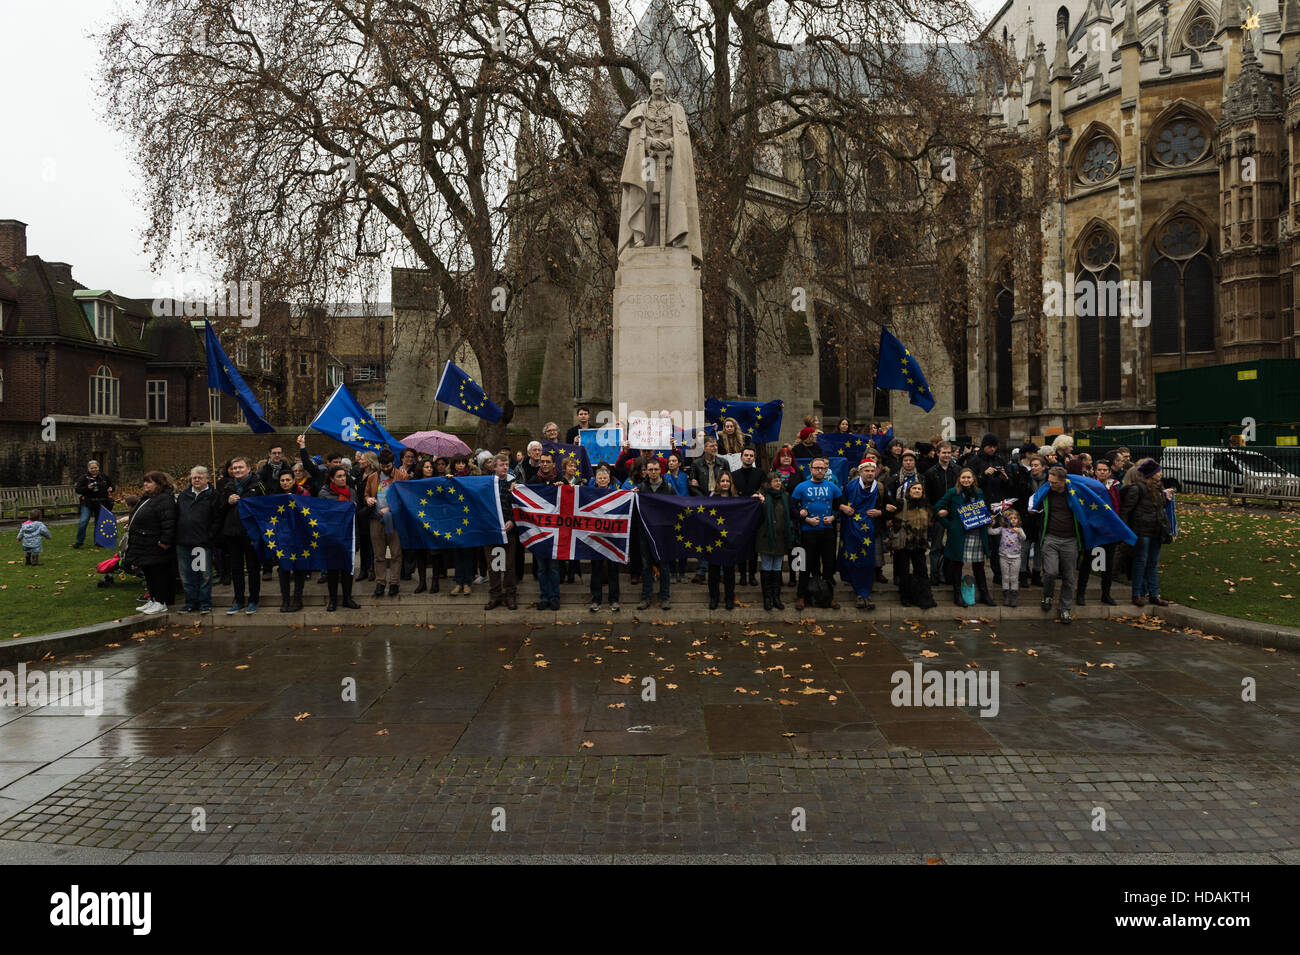 London, UK. 10th December 2016. A large group of pro-EU supporters gather in Old Palace Yard to take part in 'The Silent Chain For Europe' event on Human Rights Day. Participants link arms around the George V statue and remain silent in a symbolic act of concern about the existing rights of people living in the UK guaranteed by the European Union membership and threatened by Brexit. Wiktor Szymanowicz/Alamy Live News Stock Photo